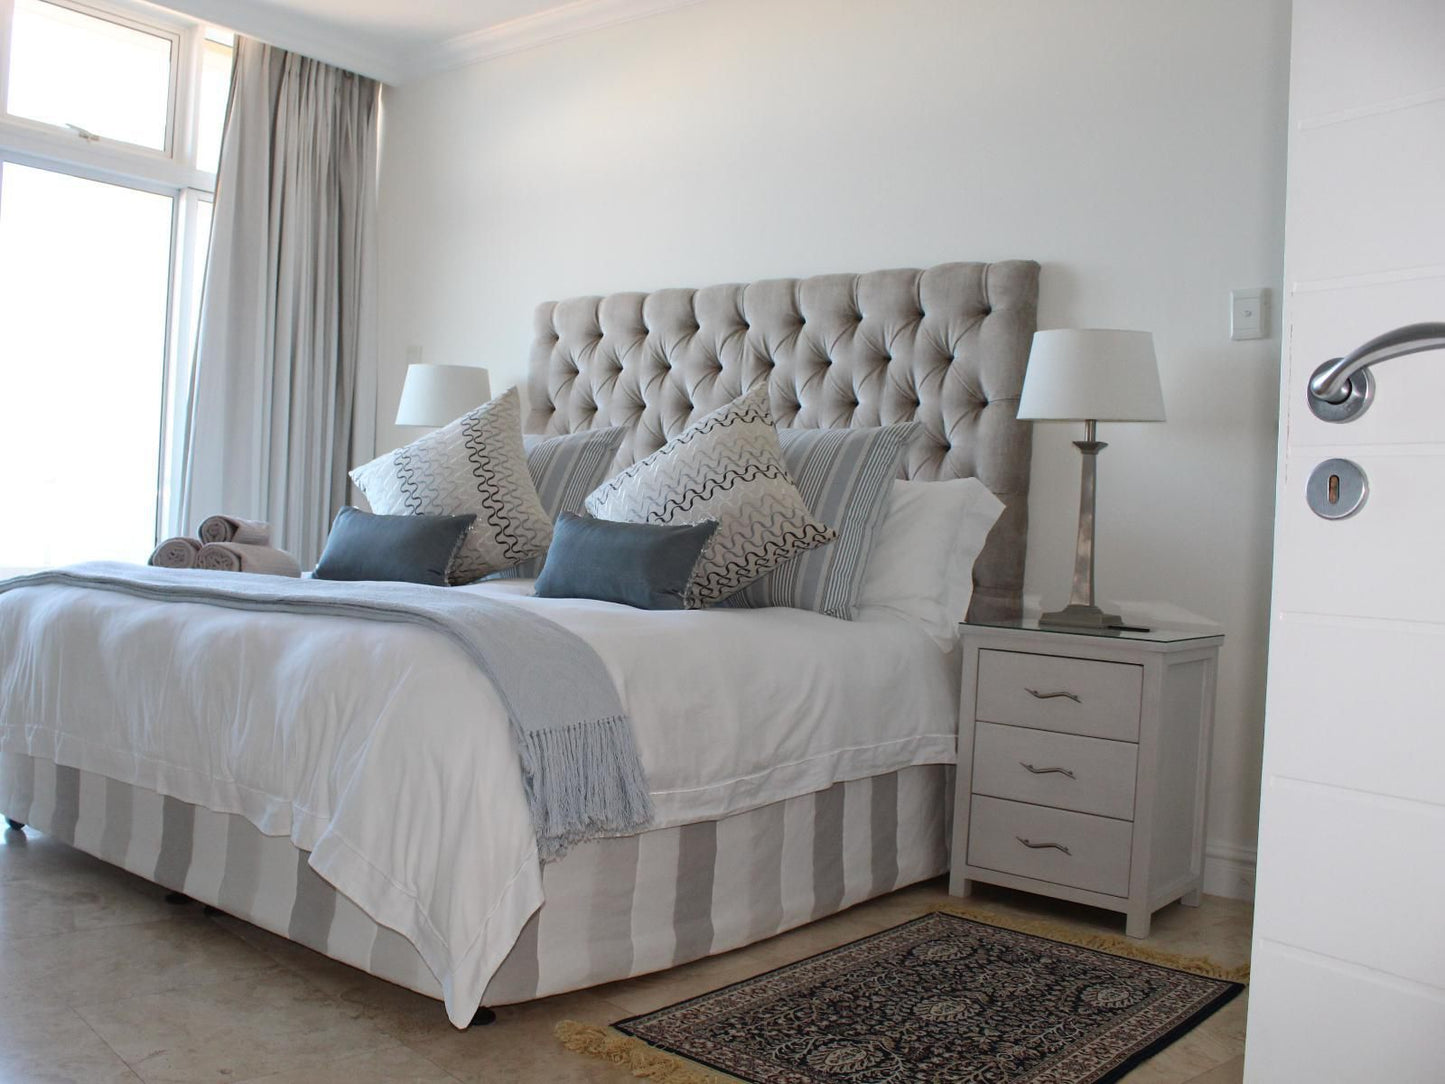 Unit 1101 Oyster Rock Umhlanga Durban Kwazulu Natal South Africa Unsaturated, Bedroom